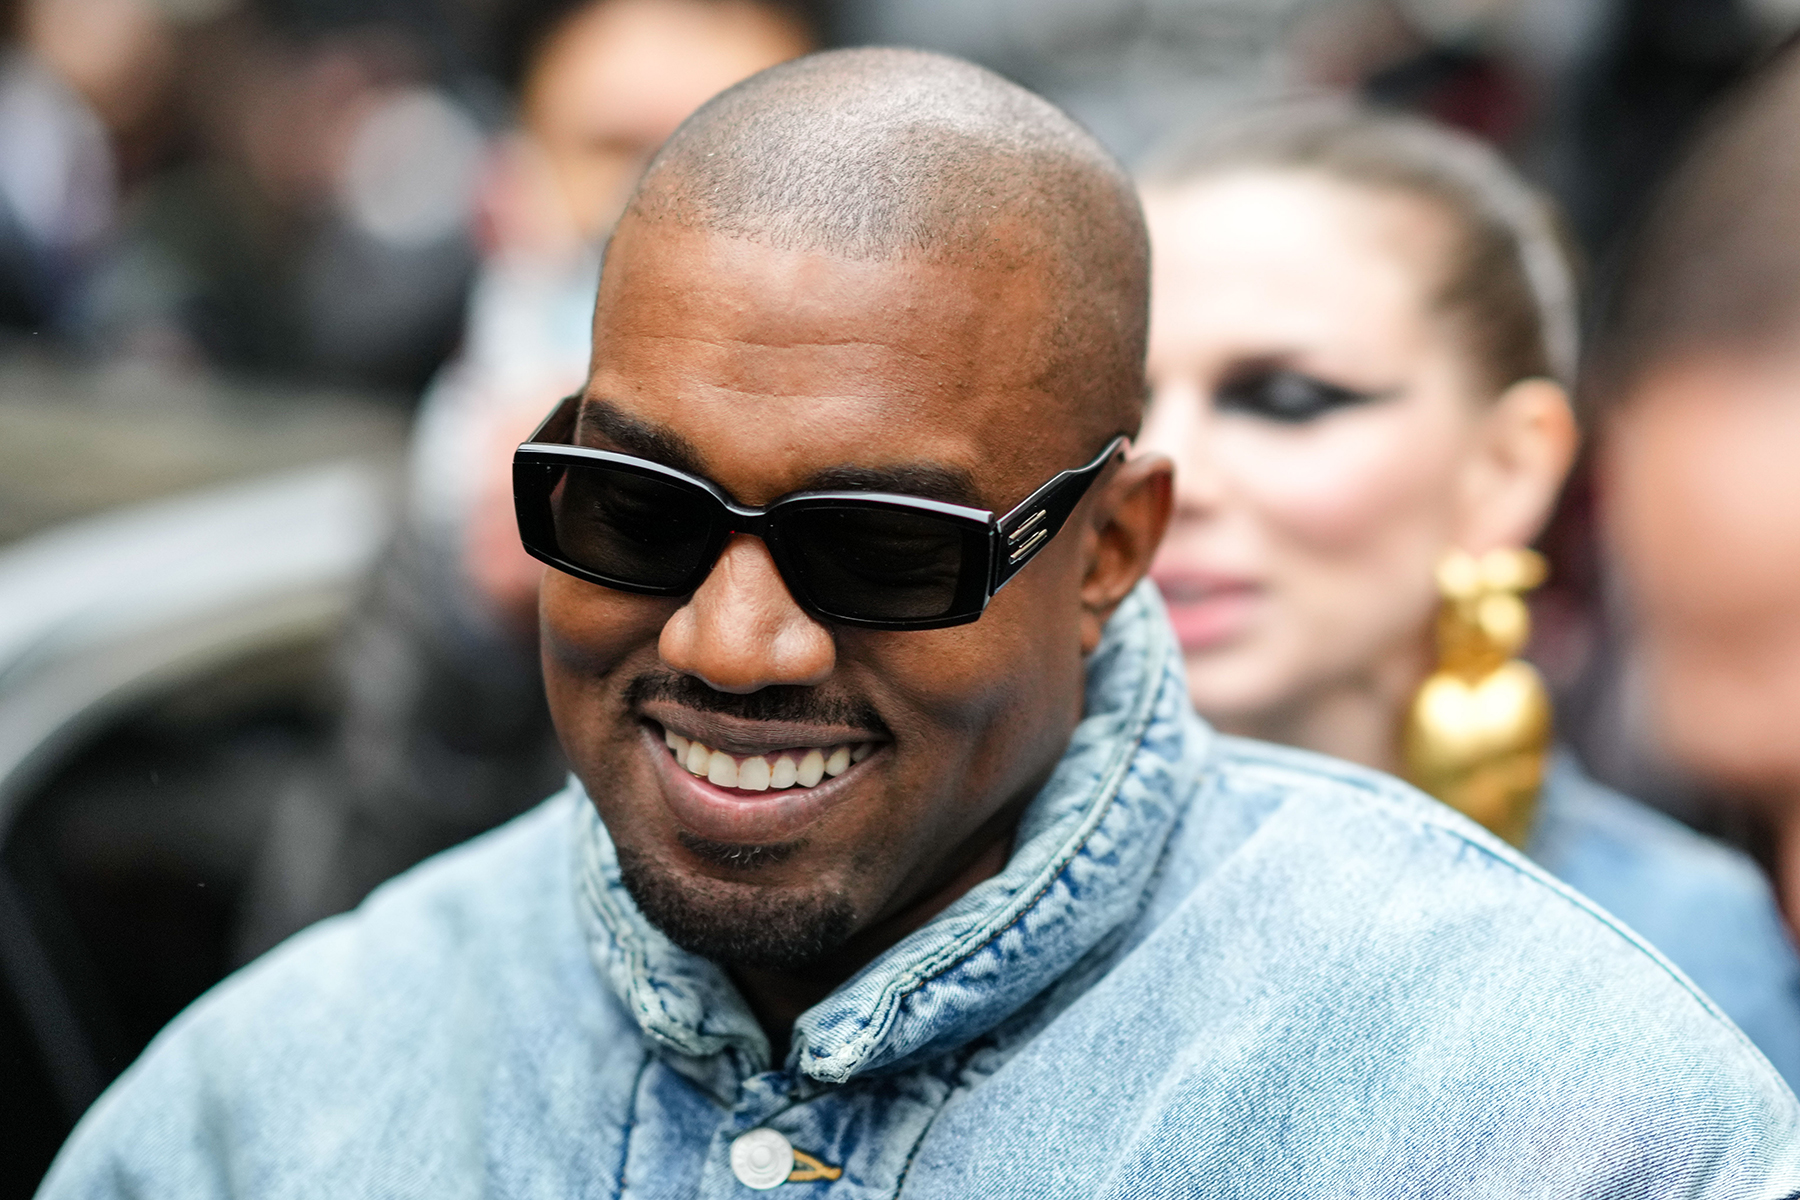 Kanye West is being lined up to become Louis Vuitton's new